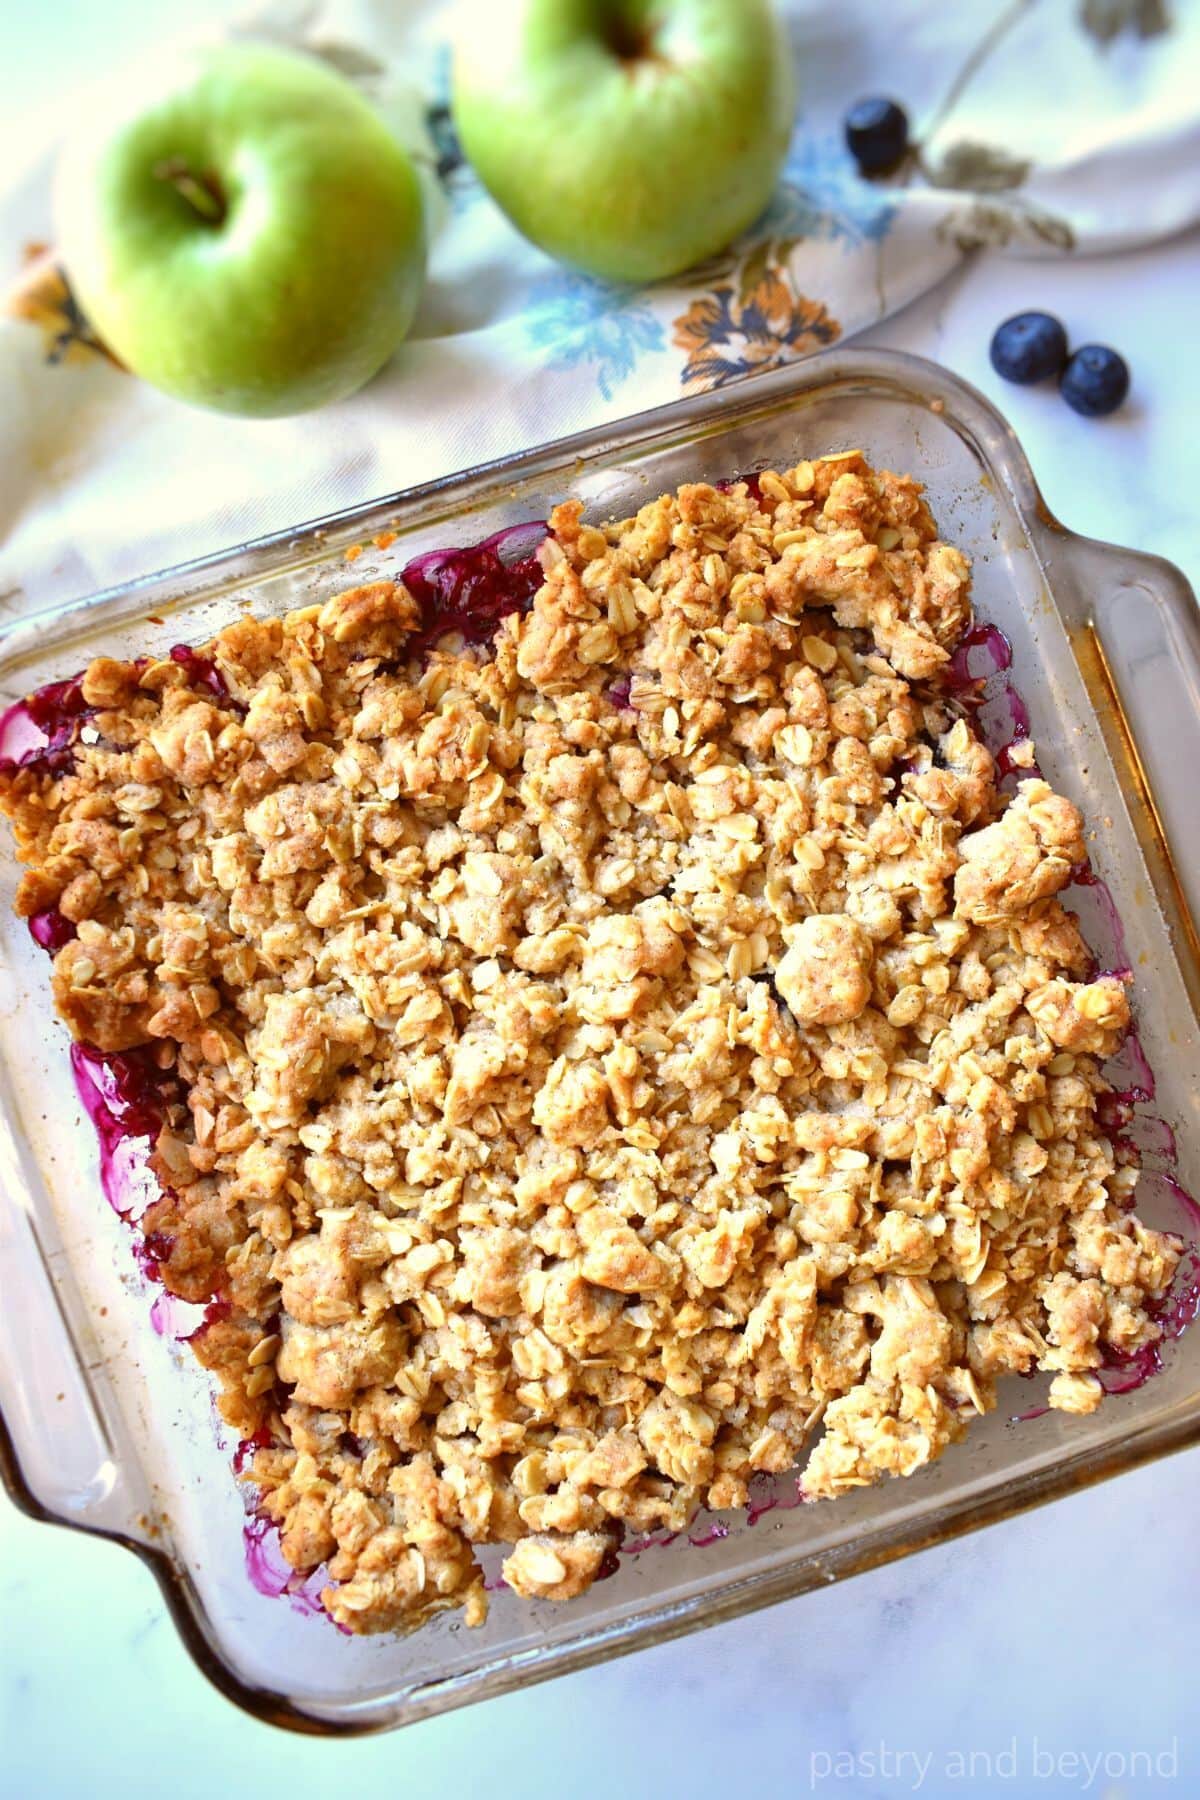 Apple and blueberry crumble in a baking dish with apples and blueberries in the background.